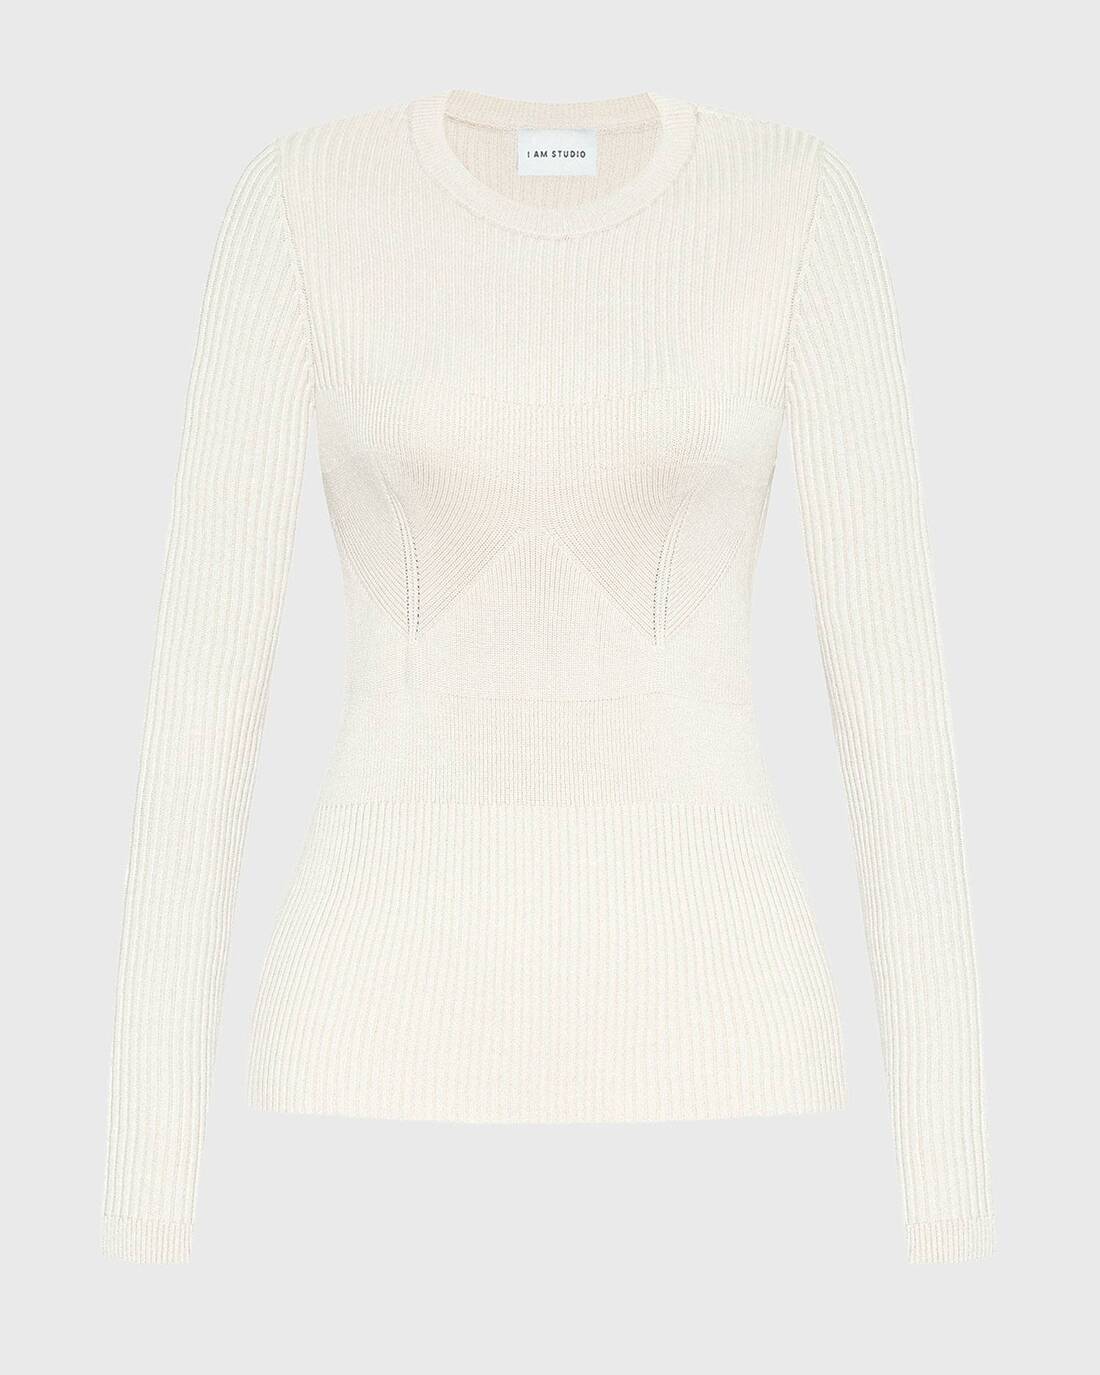 Relief style mock neck